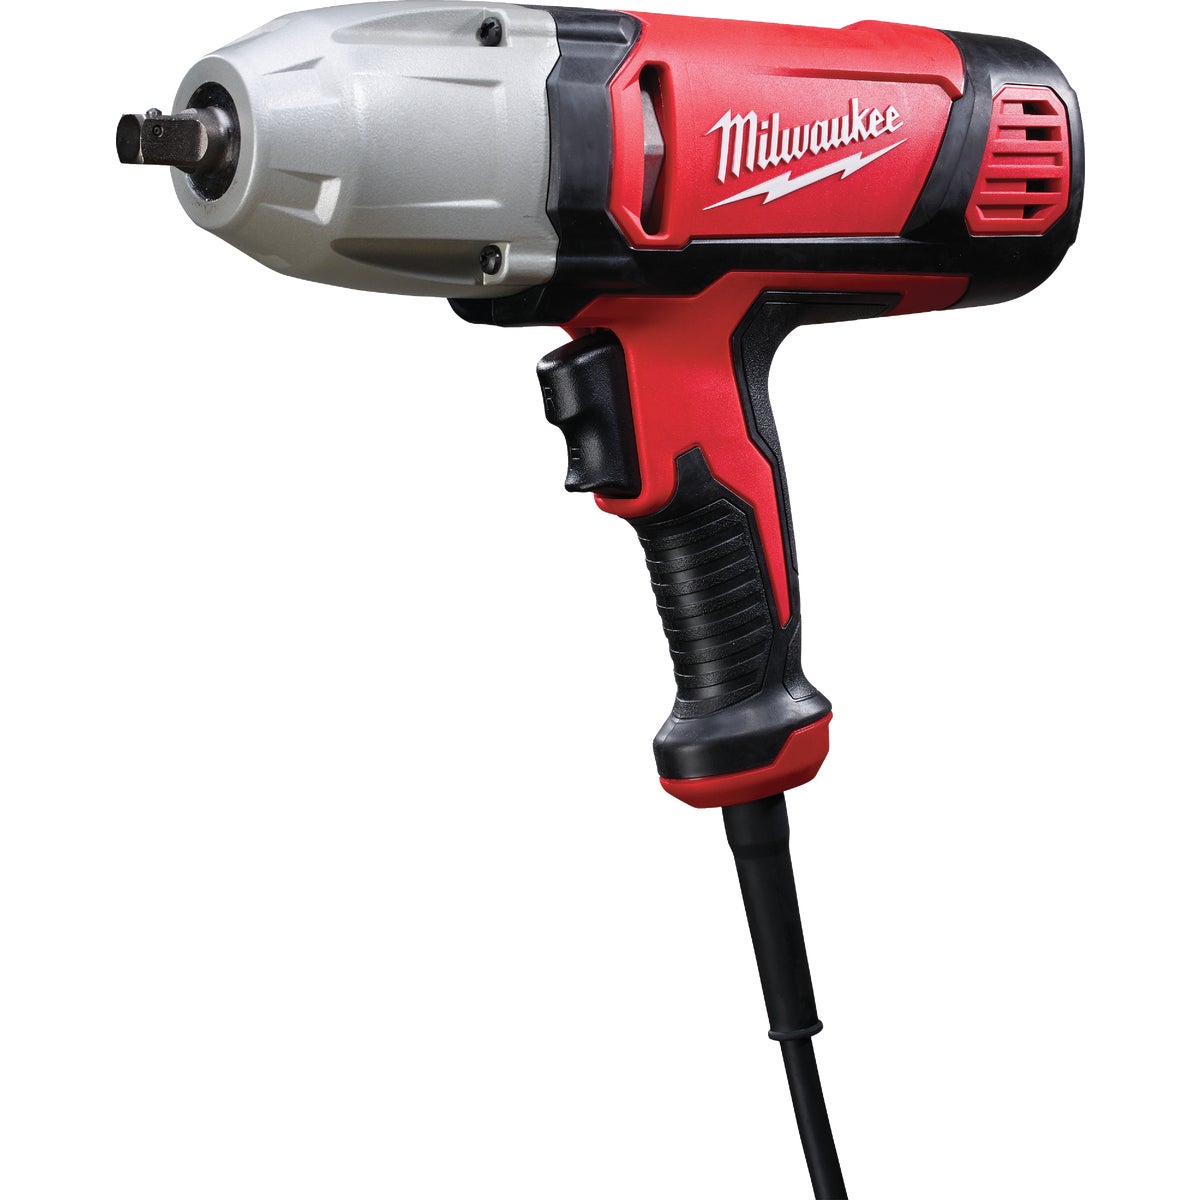 Milwaukee 1/2 In. Impact Wrench with Rocker Switch and Detent Pin